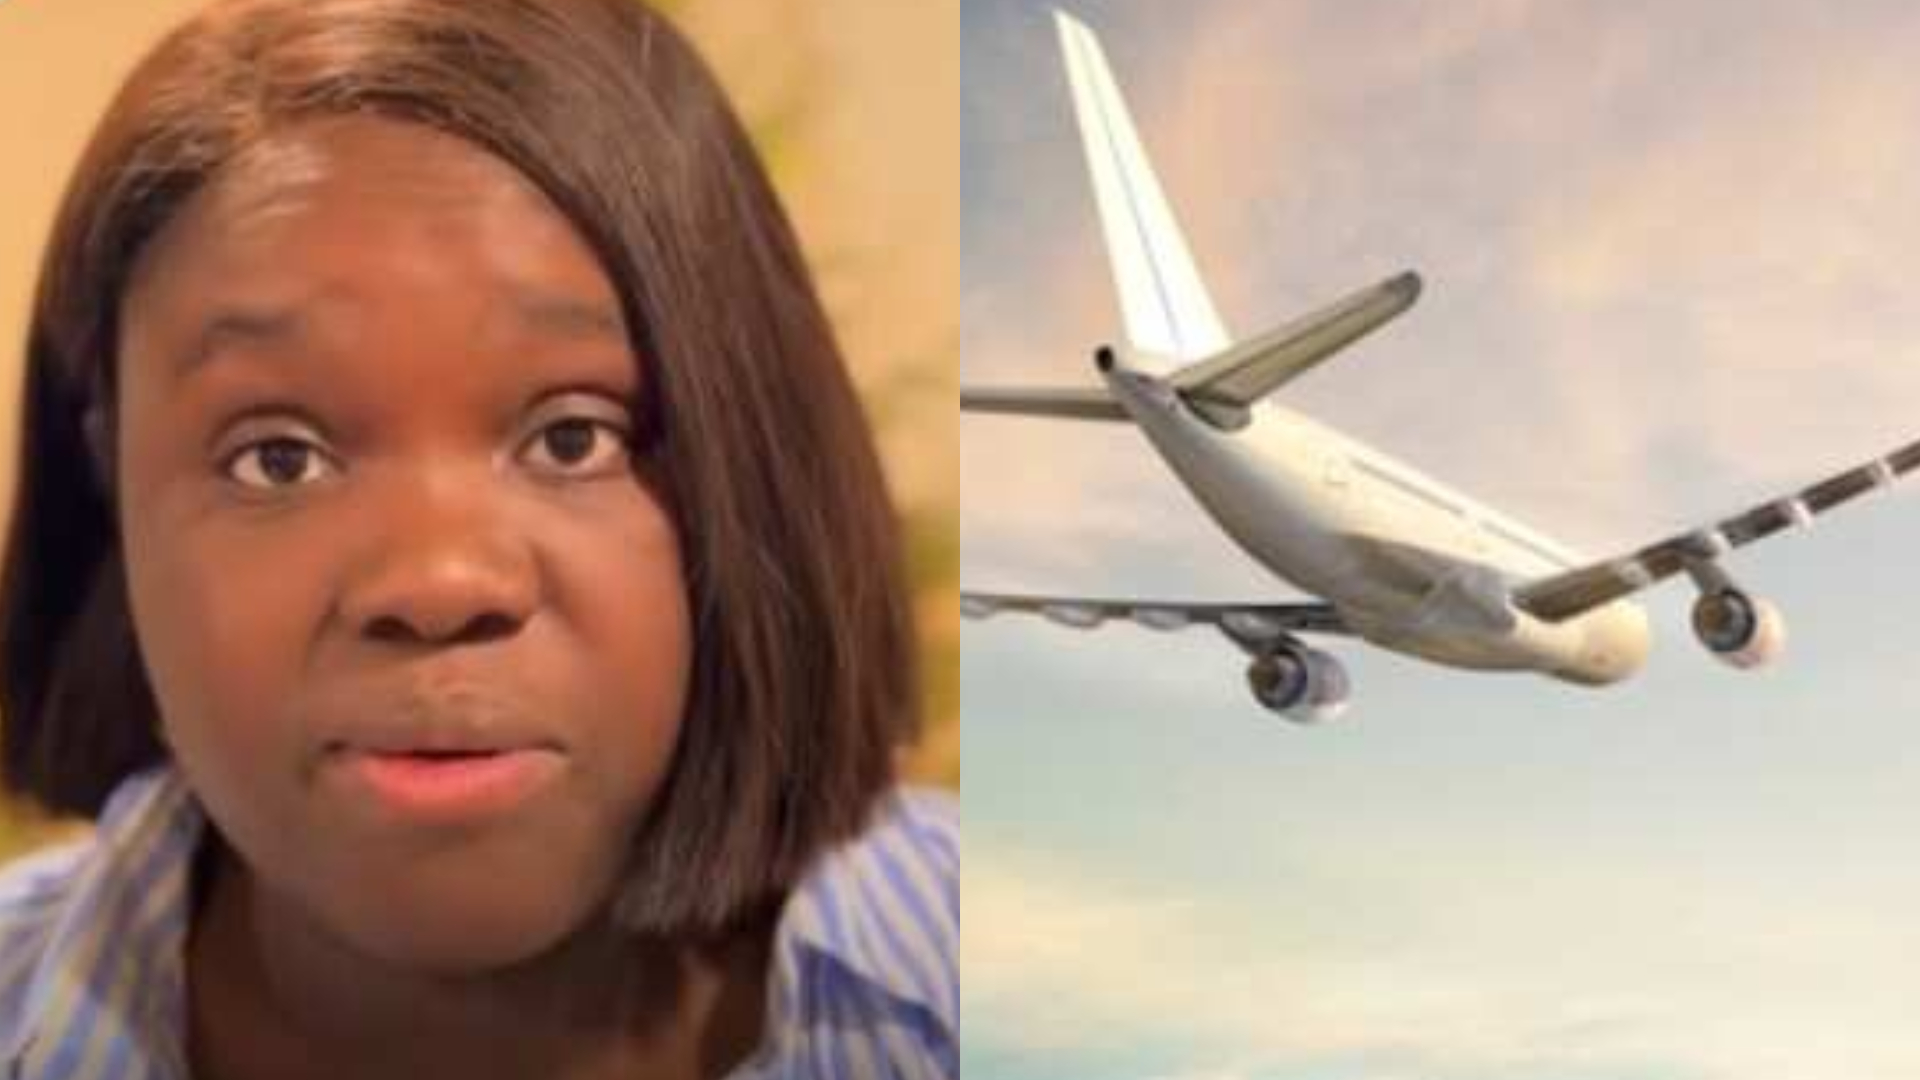 "Your Child Will Become Canadian Citizen" - Lady Shares How to Travel To Canada & Give Birth